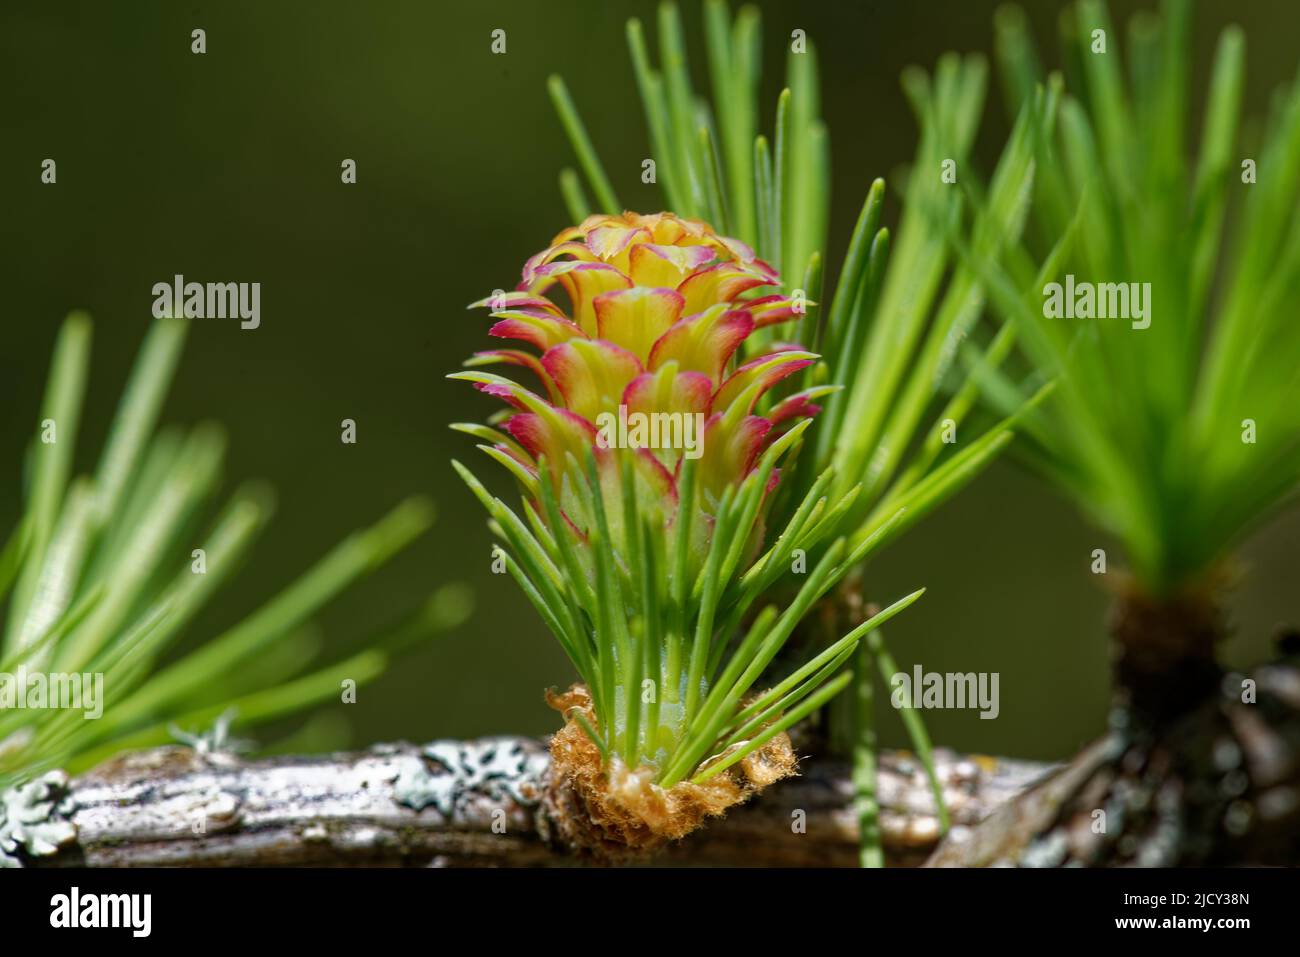 Young ovulate cone of larch tree in spring, beginning of June. Stock Photo